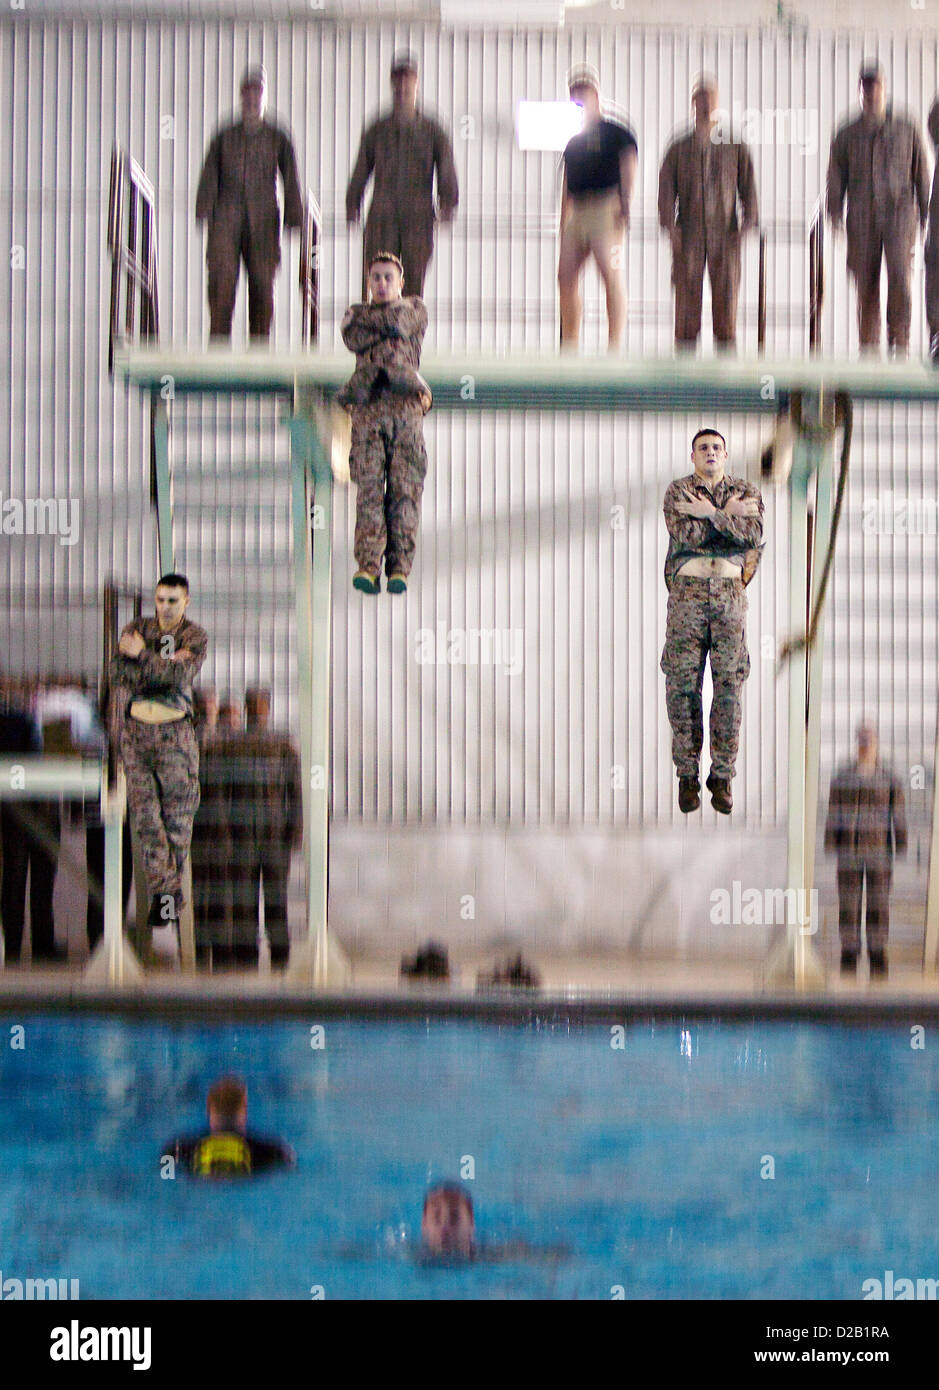 Newly commissioned second lieutenants perform an abandon ship drill during Marine Corps Water Survival Training January 17, 2013 at Marine Corps Base Quantico, VA. About 300 second lieutenants trained to drown-proof in open water, survive in freezing water and move with a combat load in both shallow and deep water along with other water-survival techniques. Stock Photo